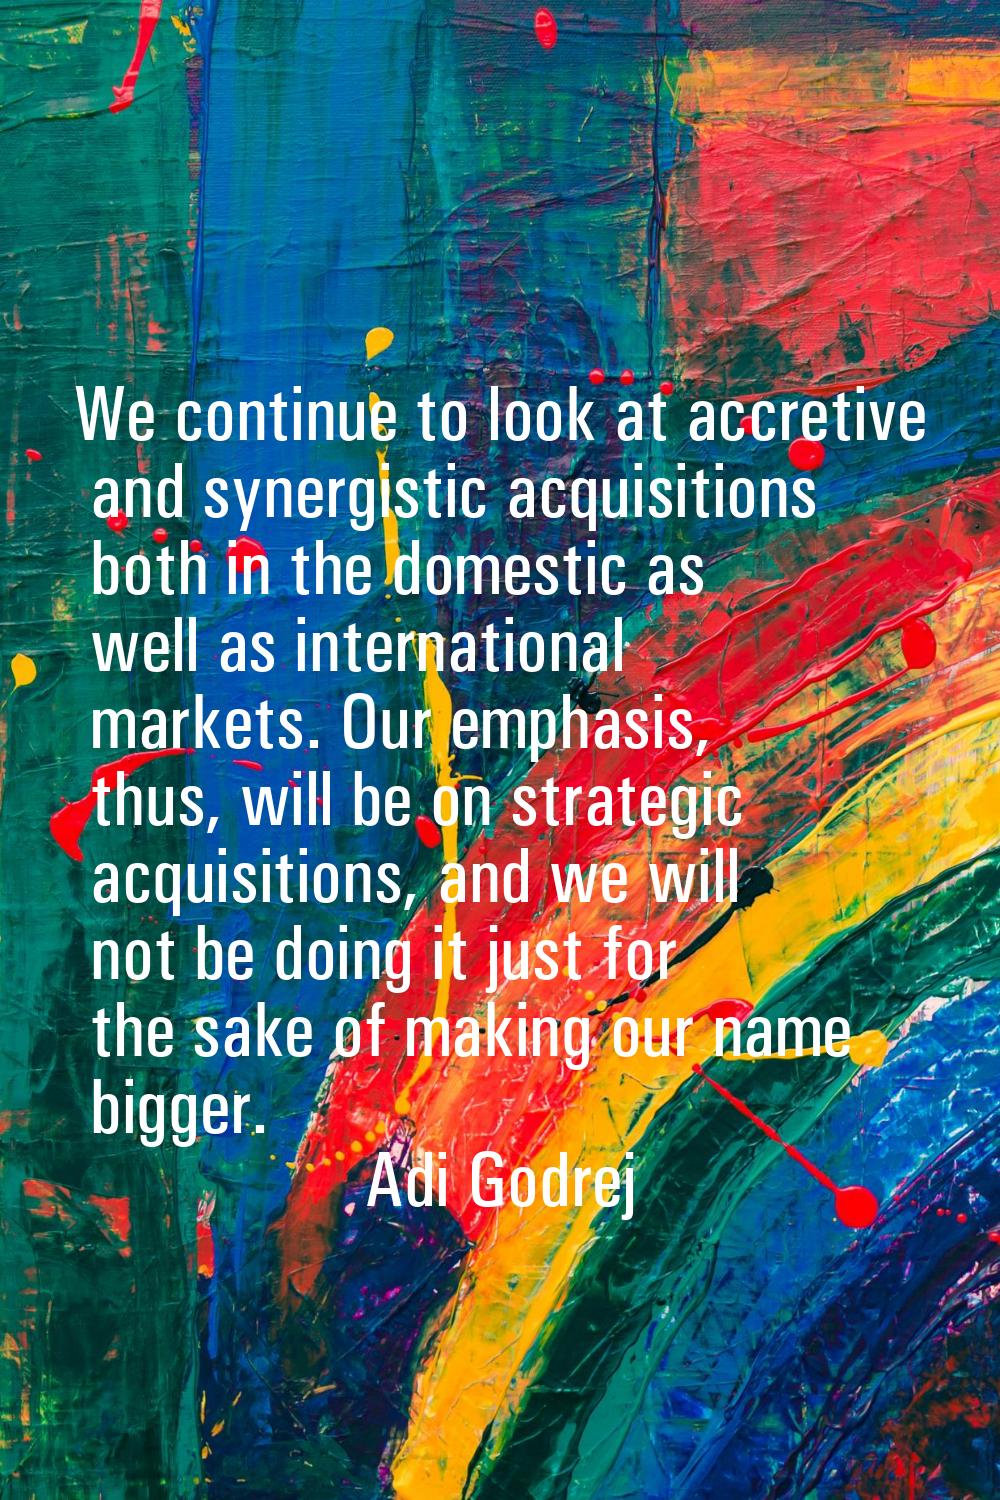 We continue to look at accretive and synergistic acquisitions both in the domestic as well as inter